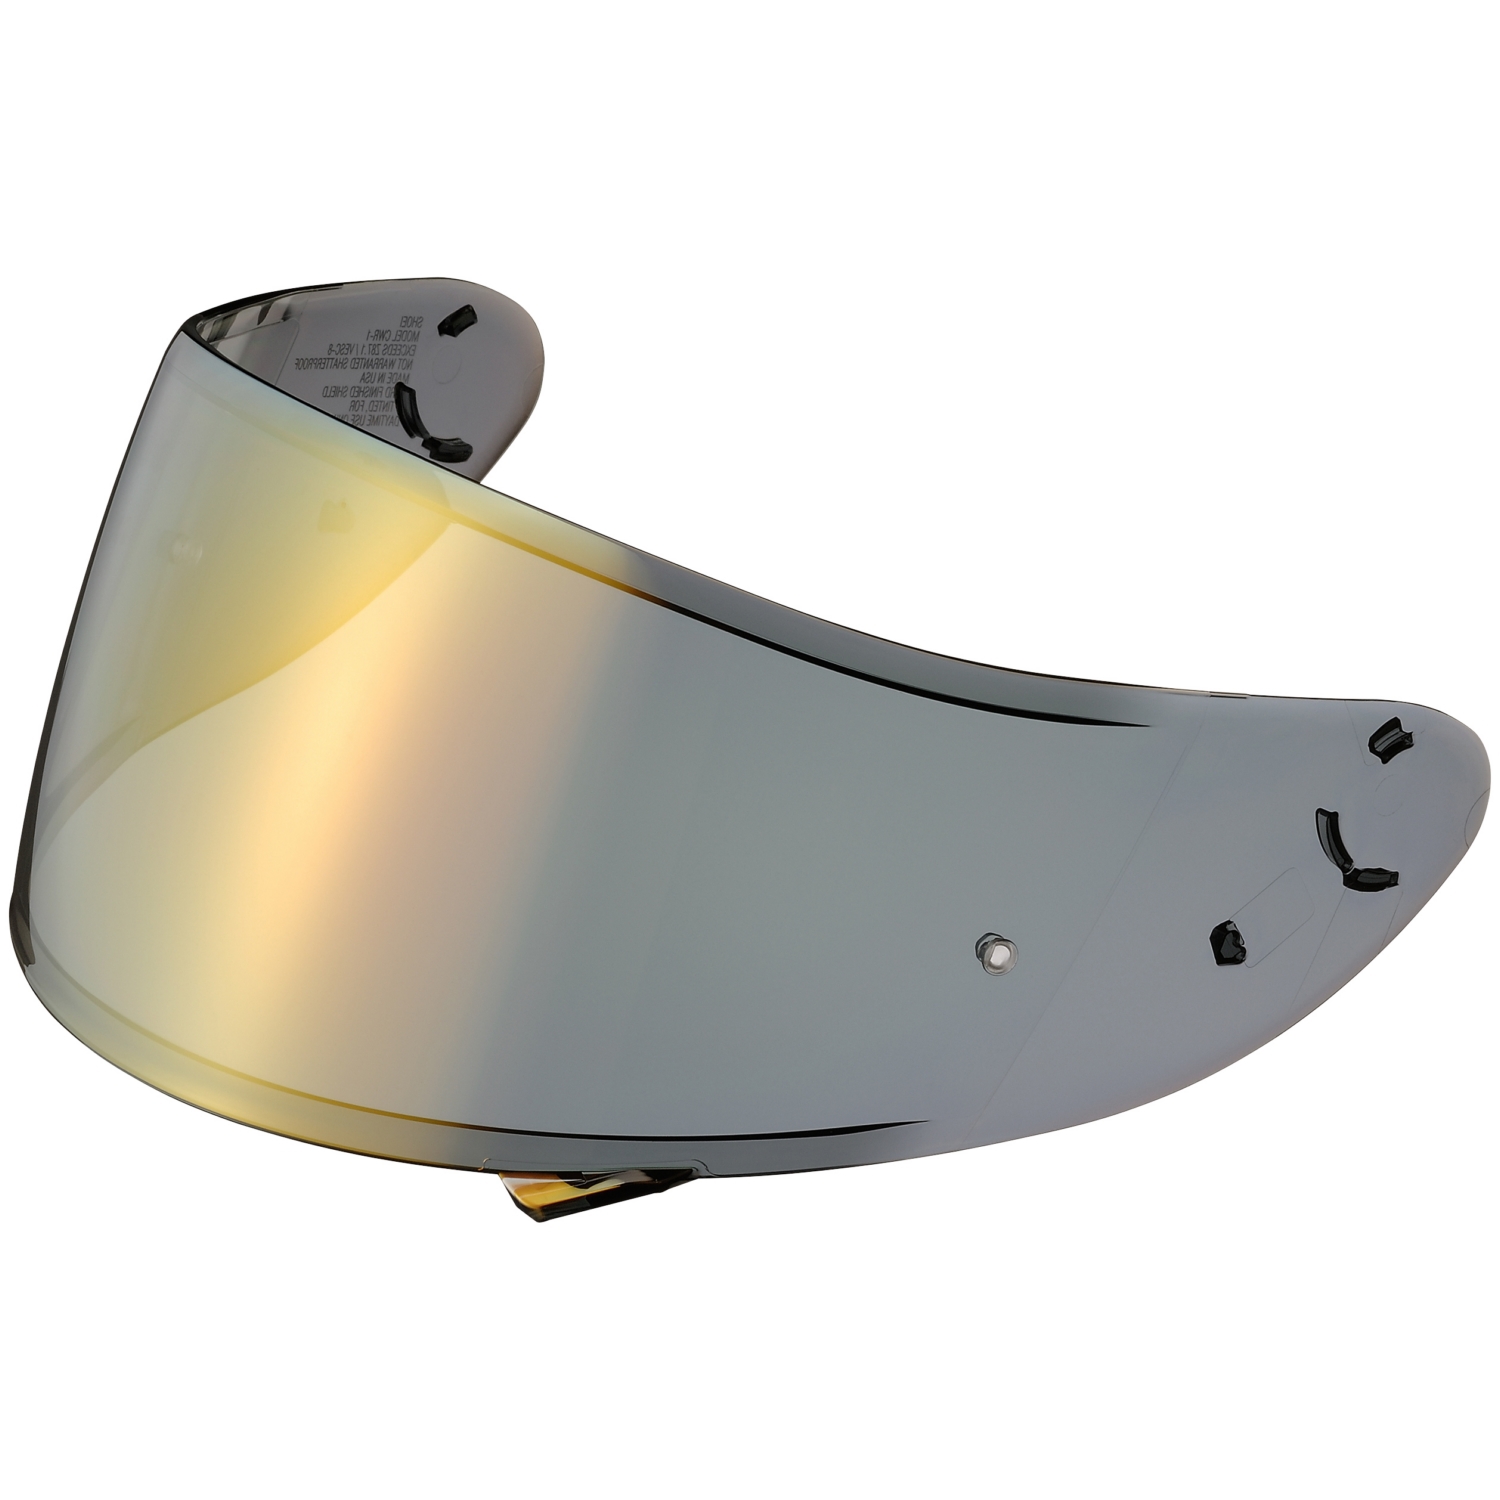 Shoei RF1200 CWR-1 Spectra Gold Shield with Pinlock Pins - image 1 of 2